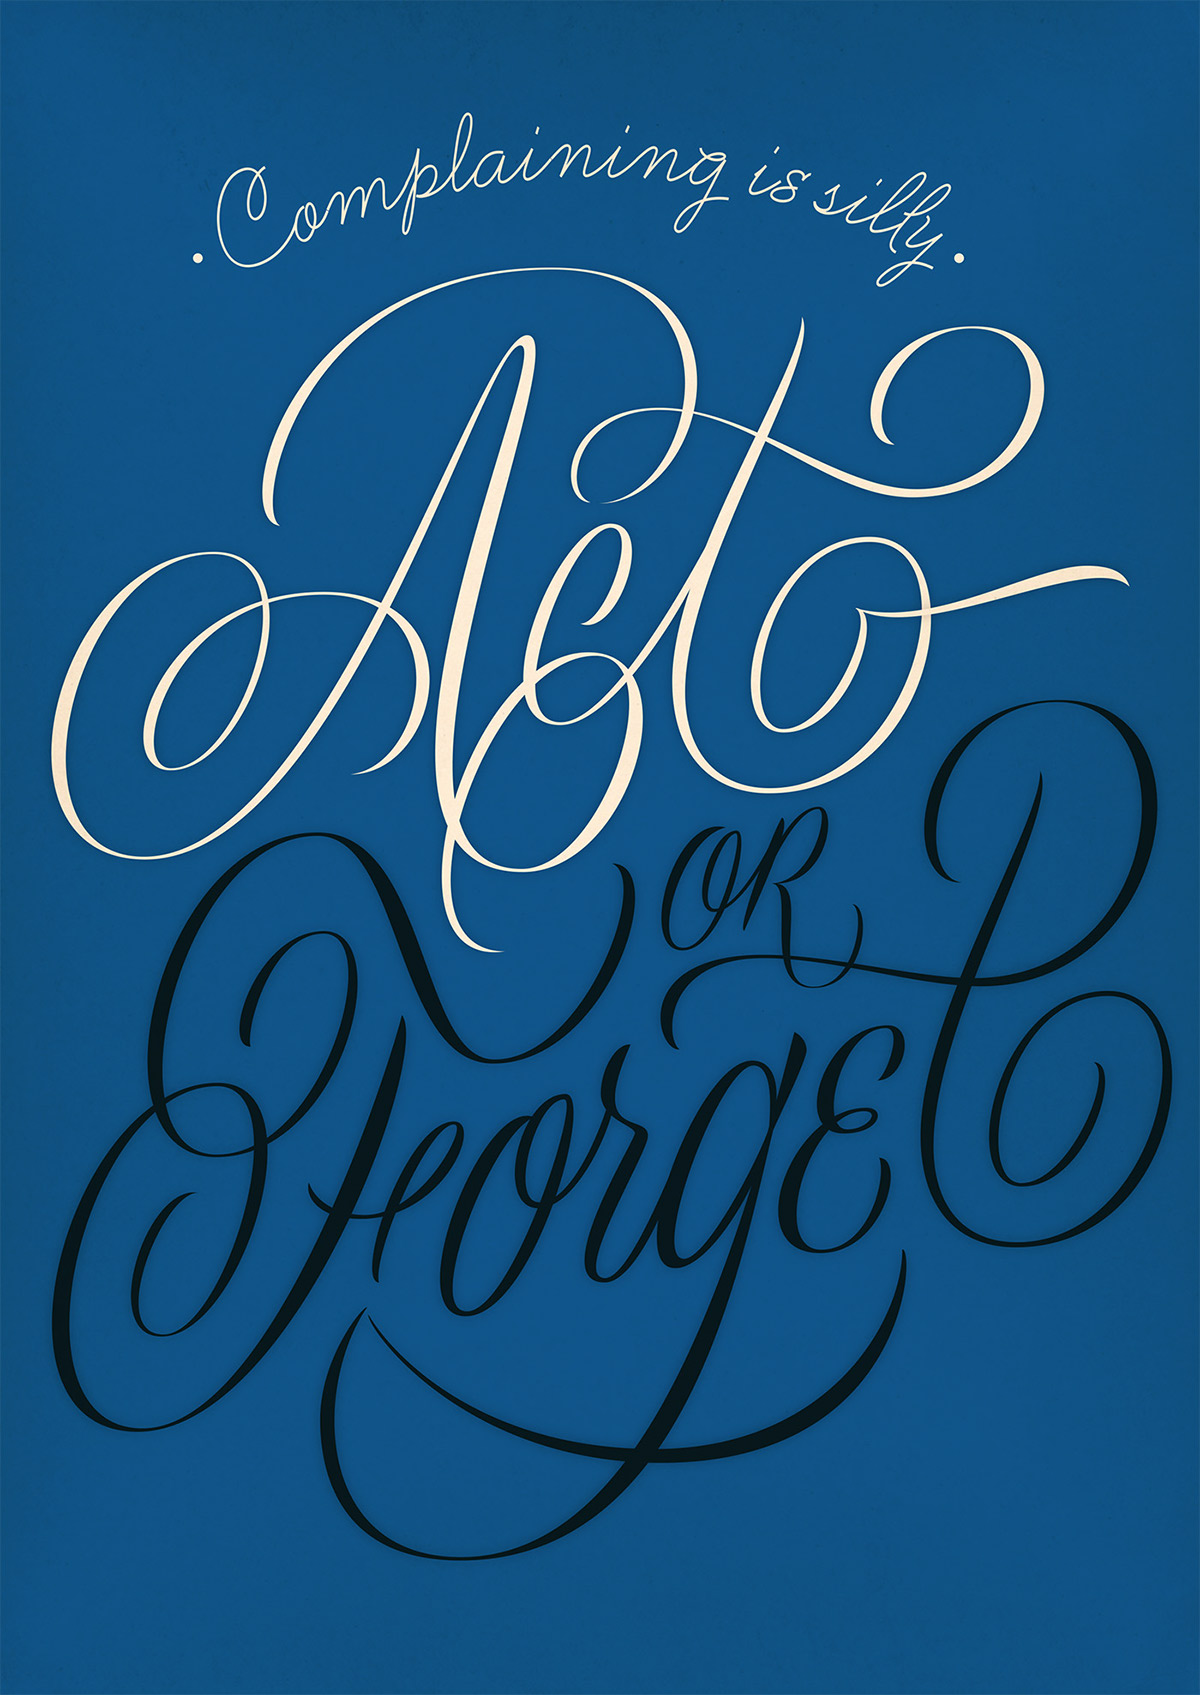 lettering type quote design quotes sagmeister beuys Lessing chimero rand